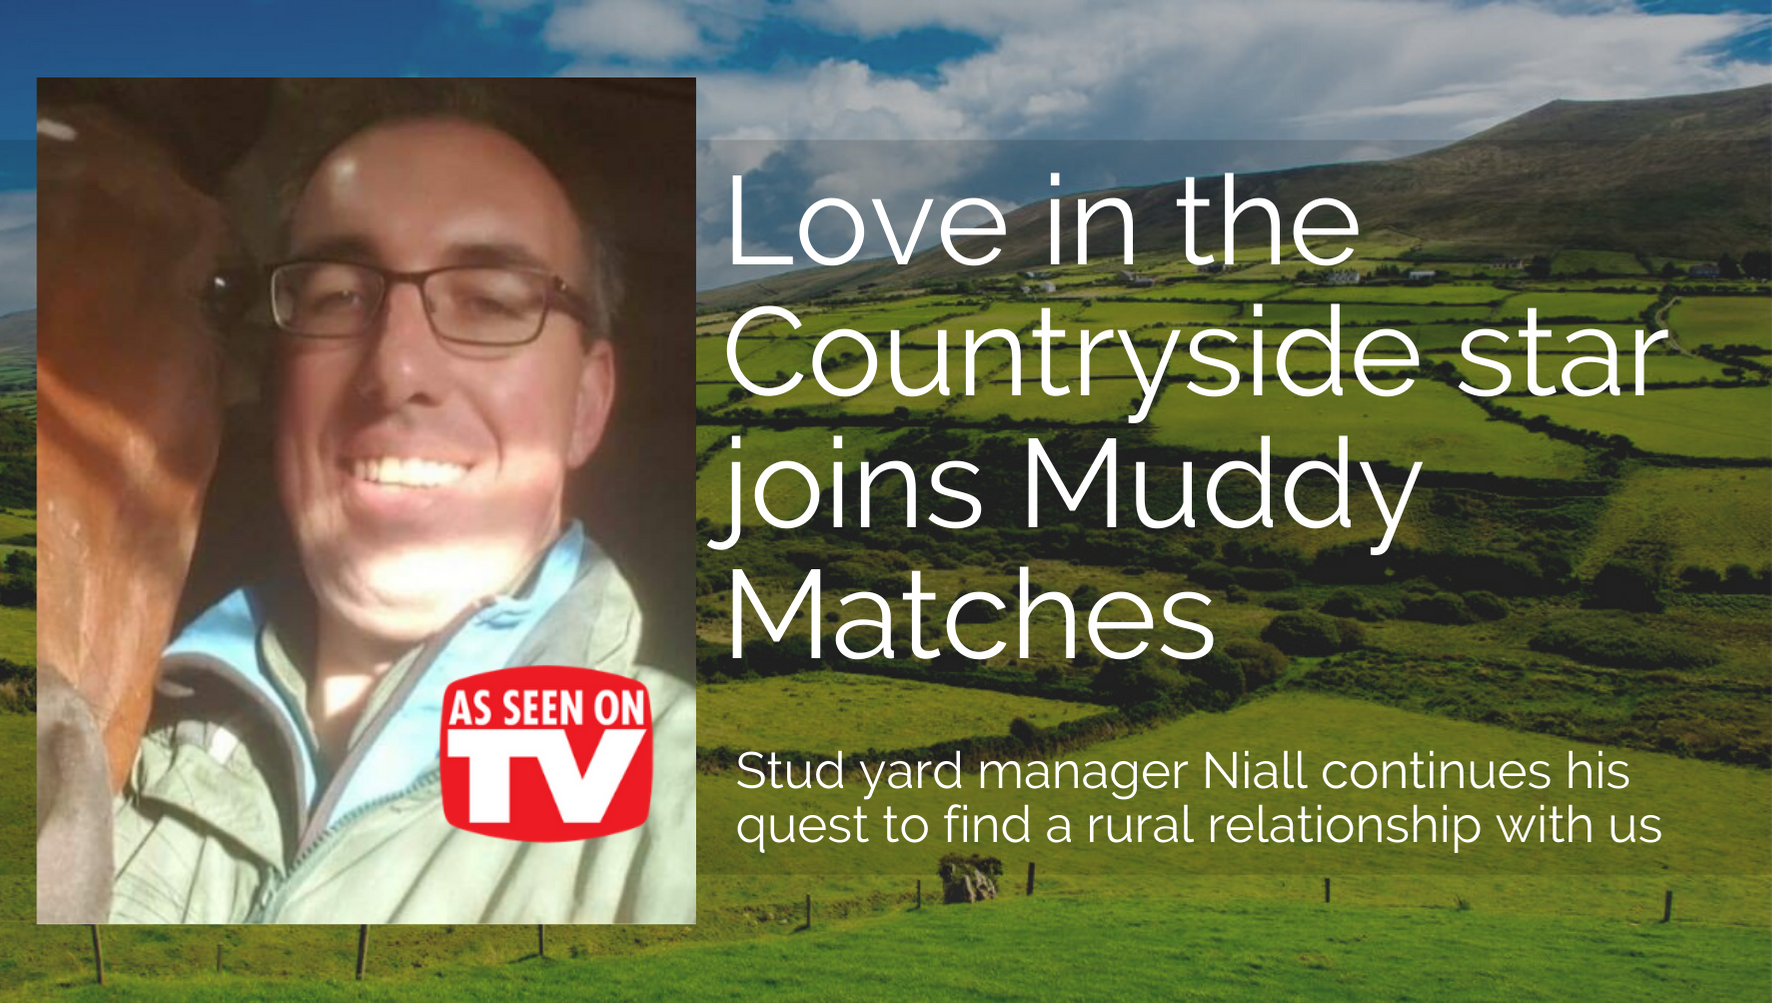 Love in the Countryside star joins Muddy Matches